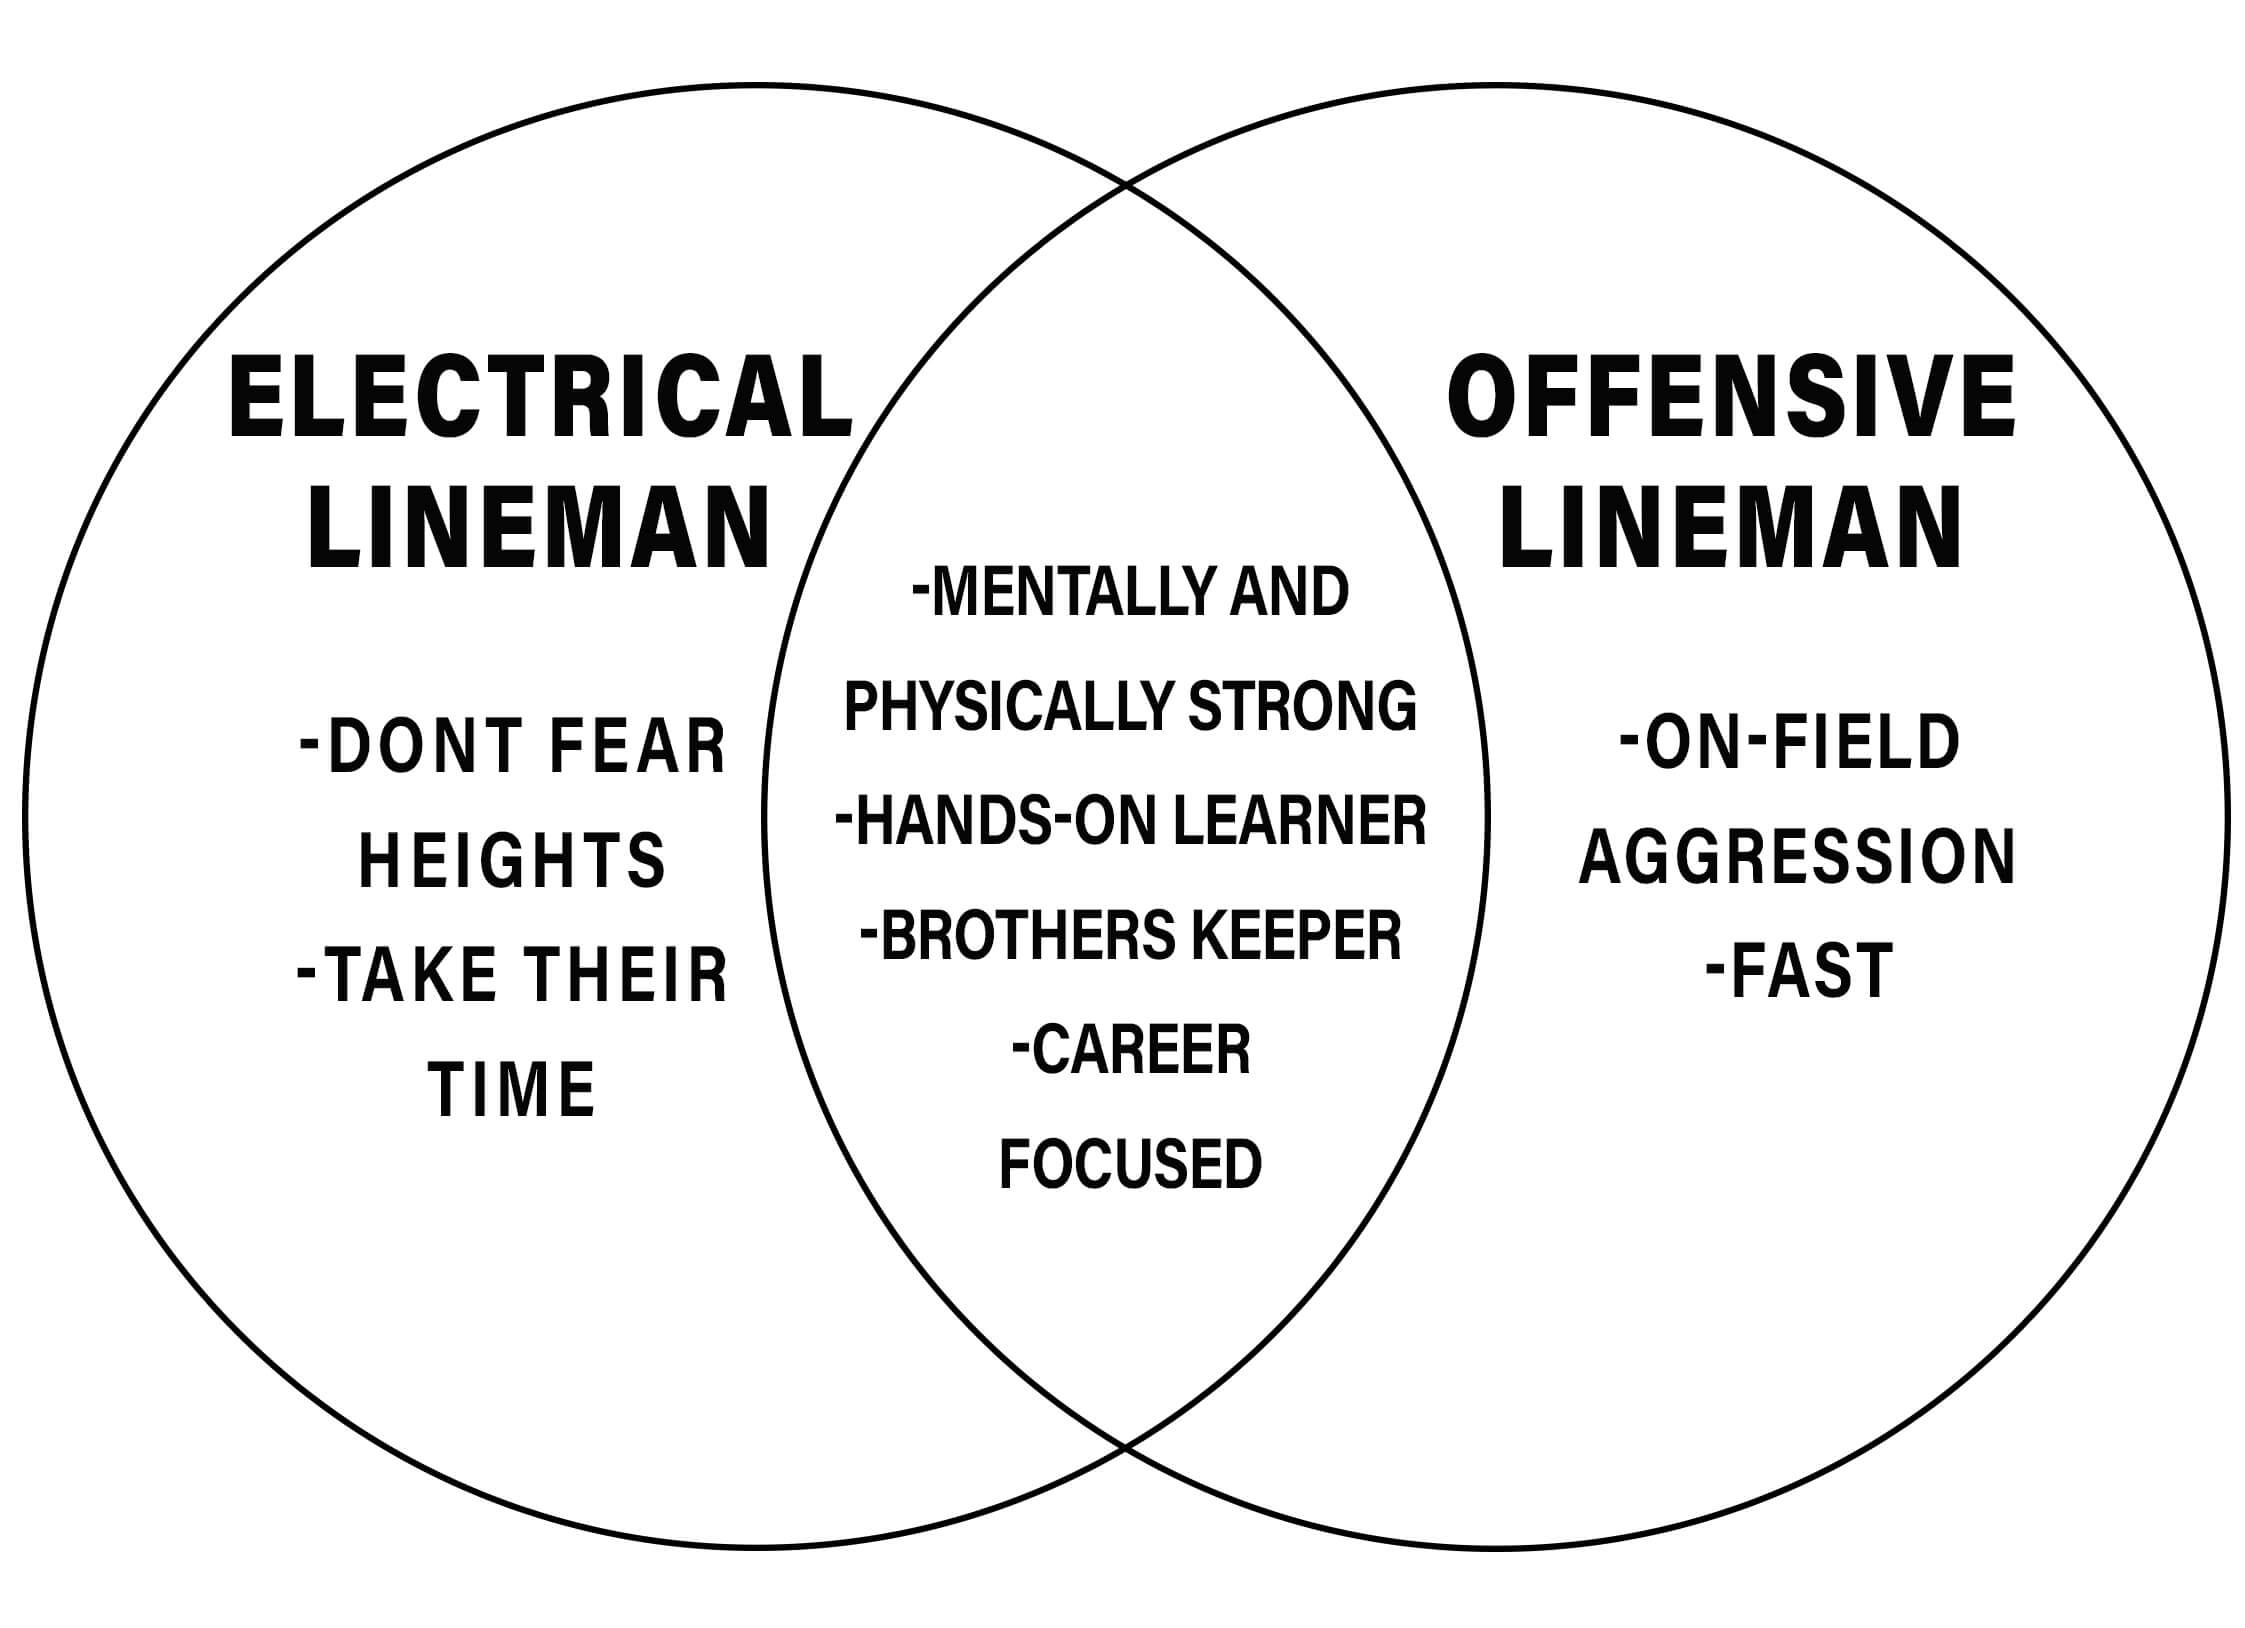 COMPARE ELECTRICAL LINEMAN  VS. OFFENSIVE LINEMAN